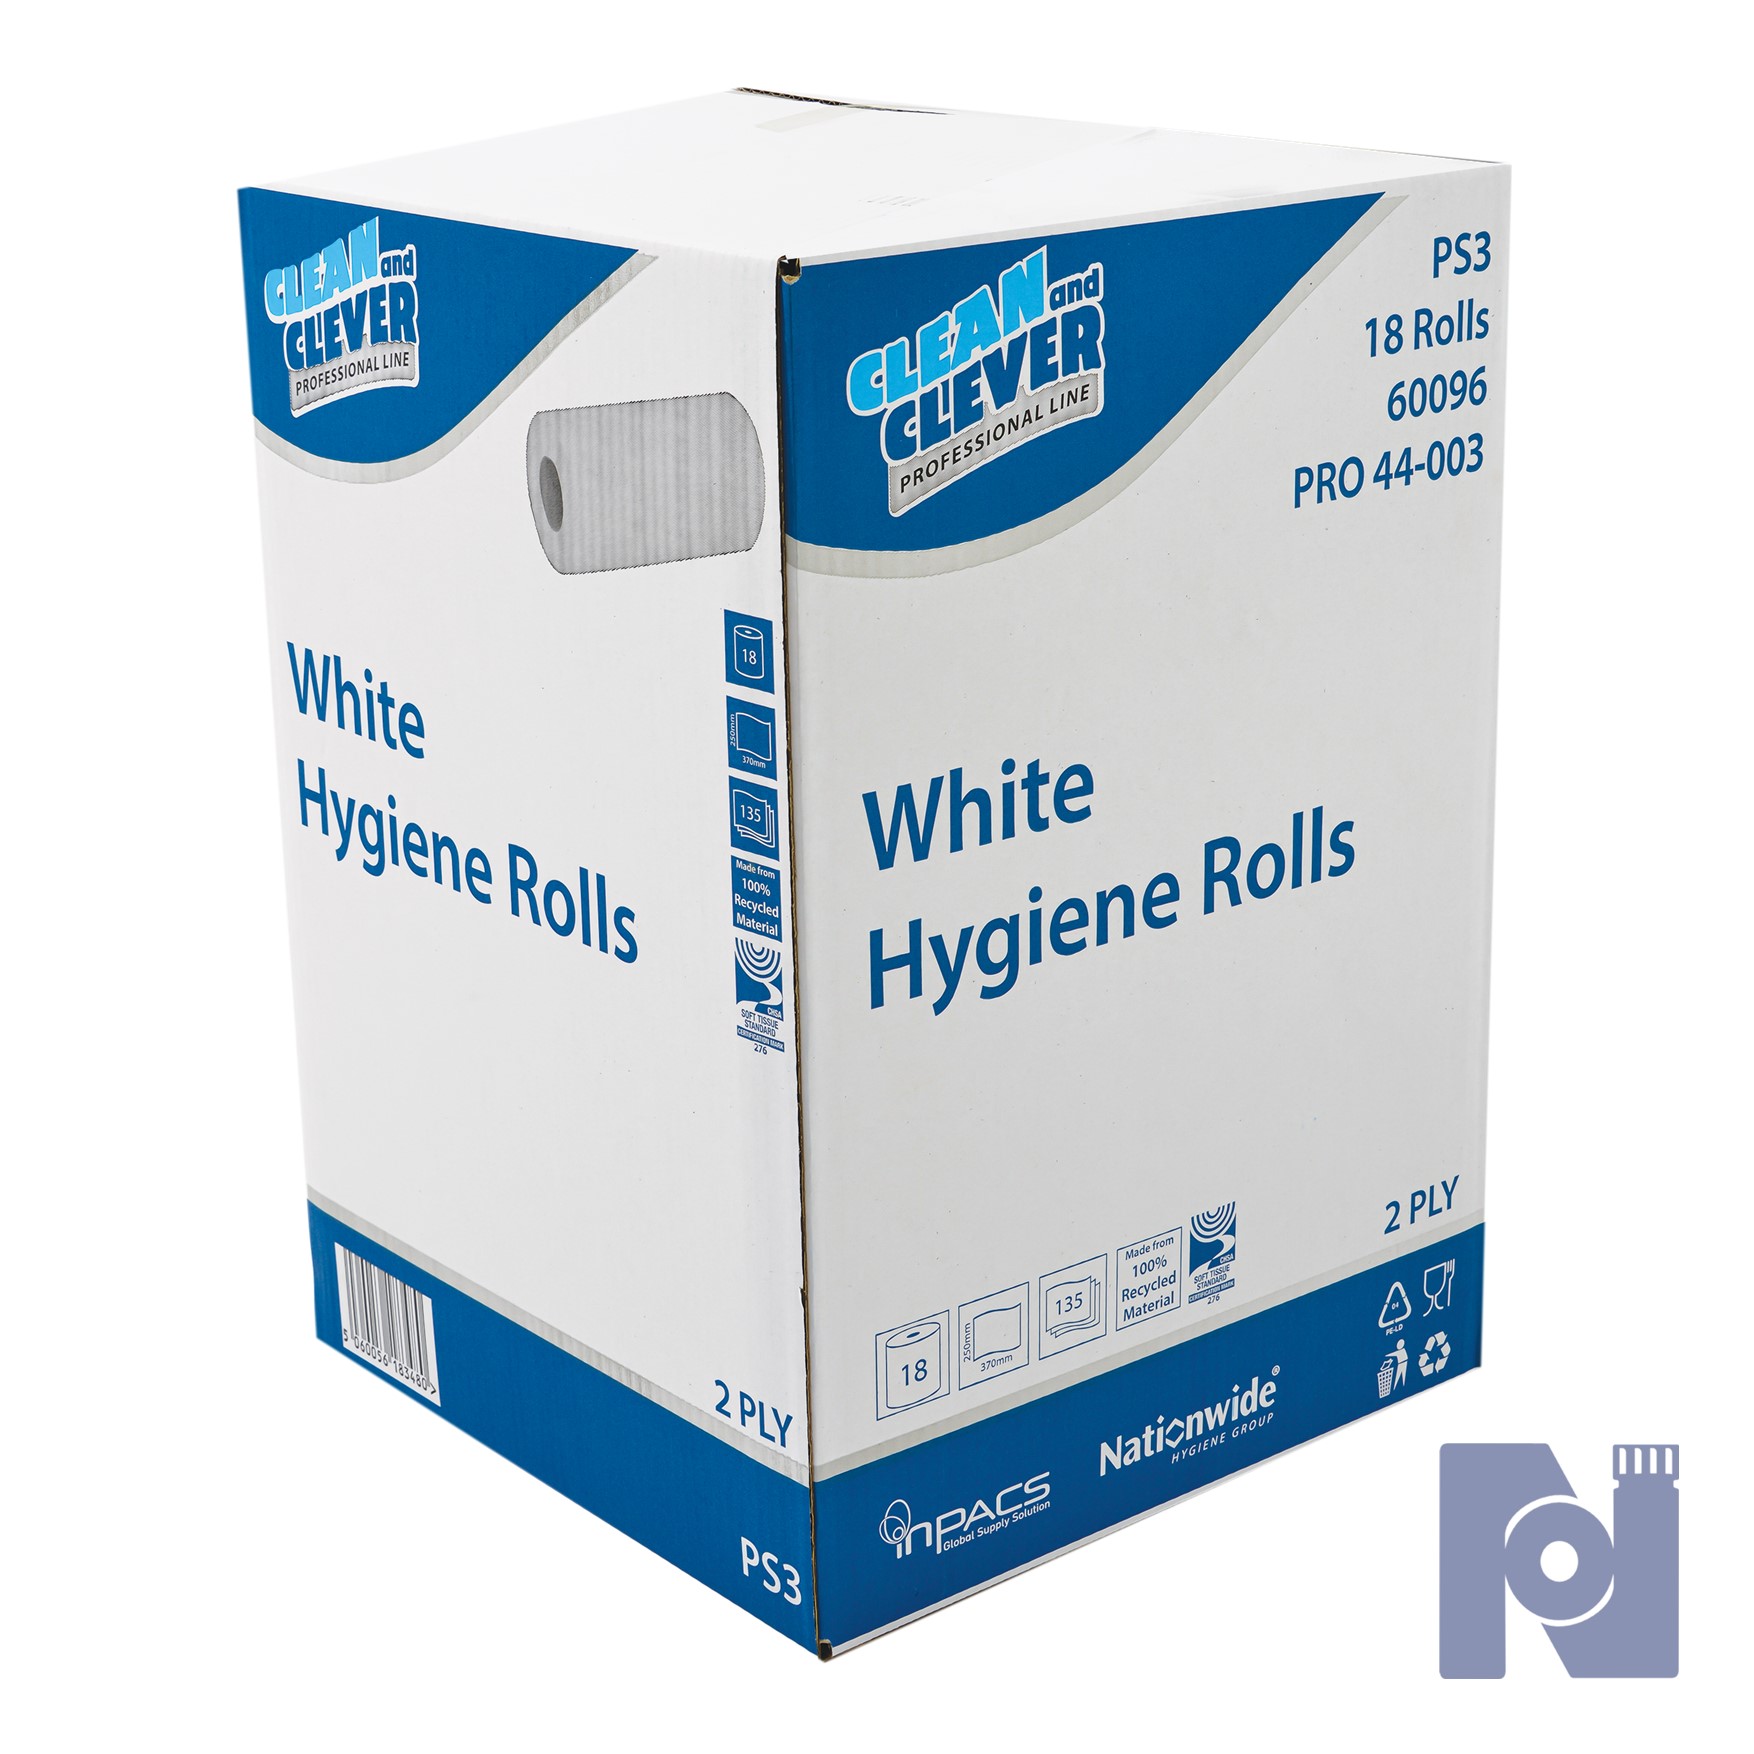 Clean & Clever Hygiene Roll - White PS3